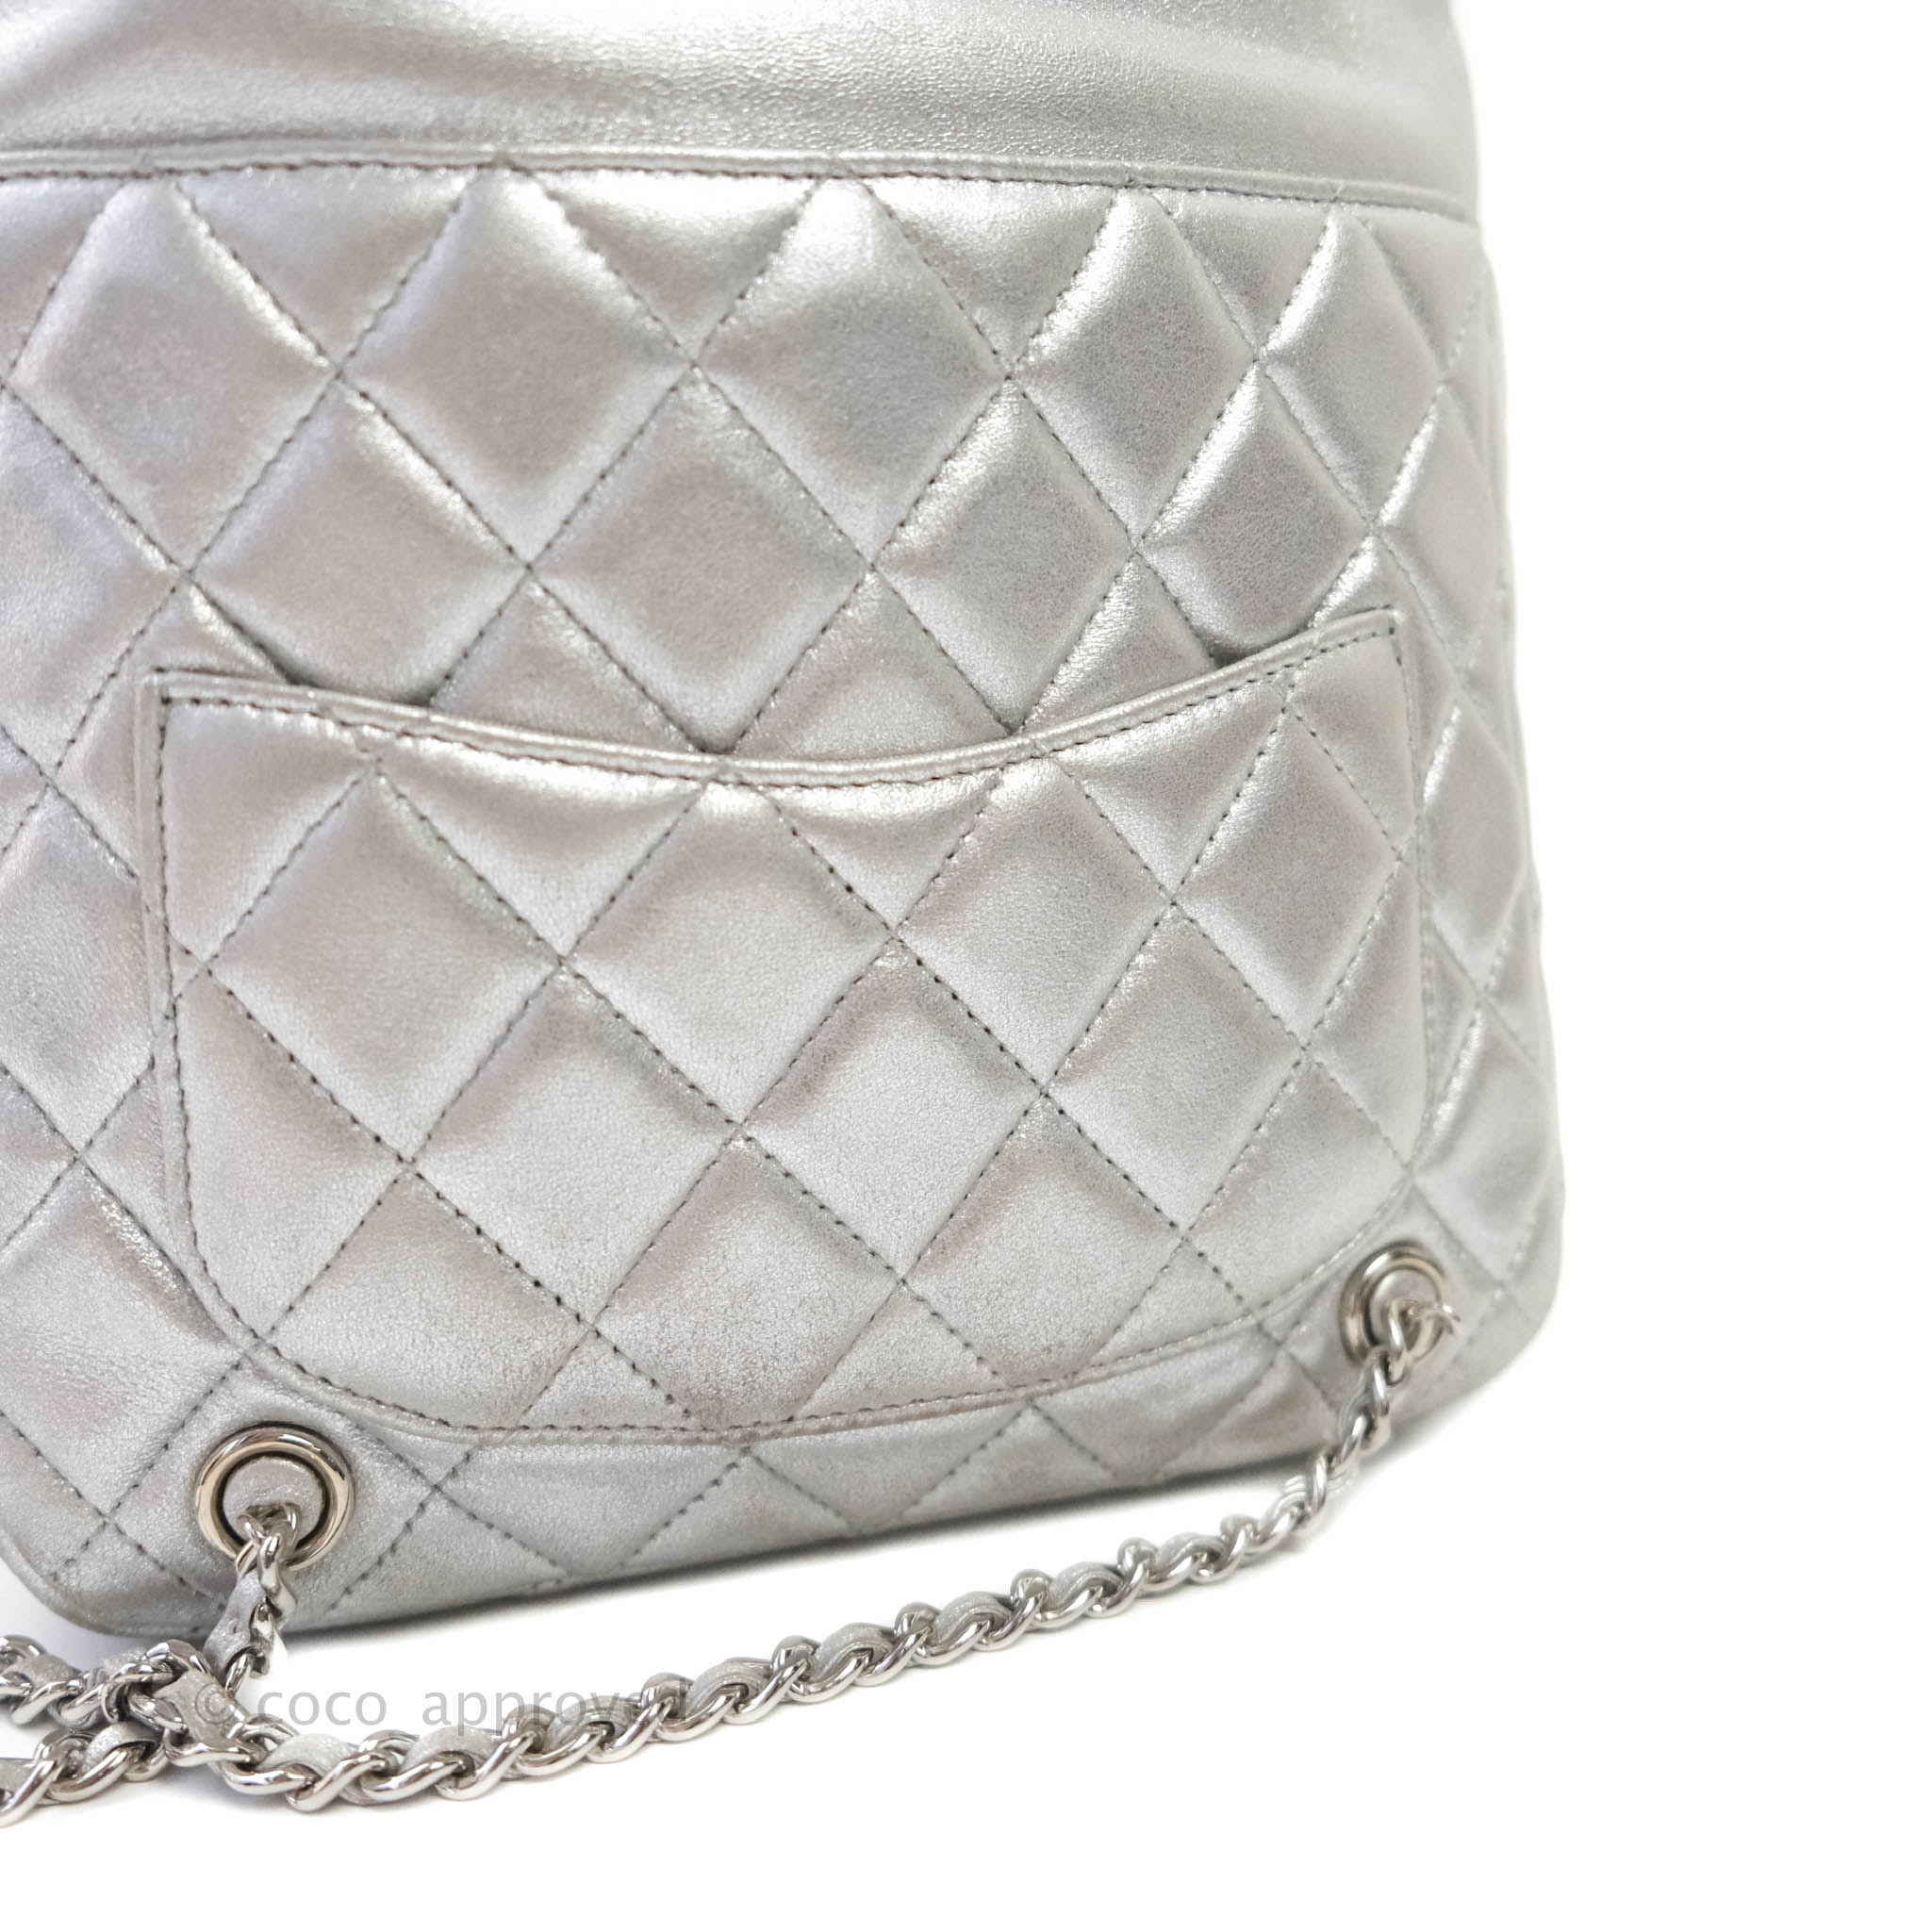 Chanel Quilted Small Metallic Silver Backpack in Seoul Lambskin